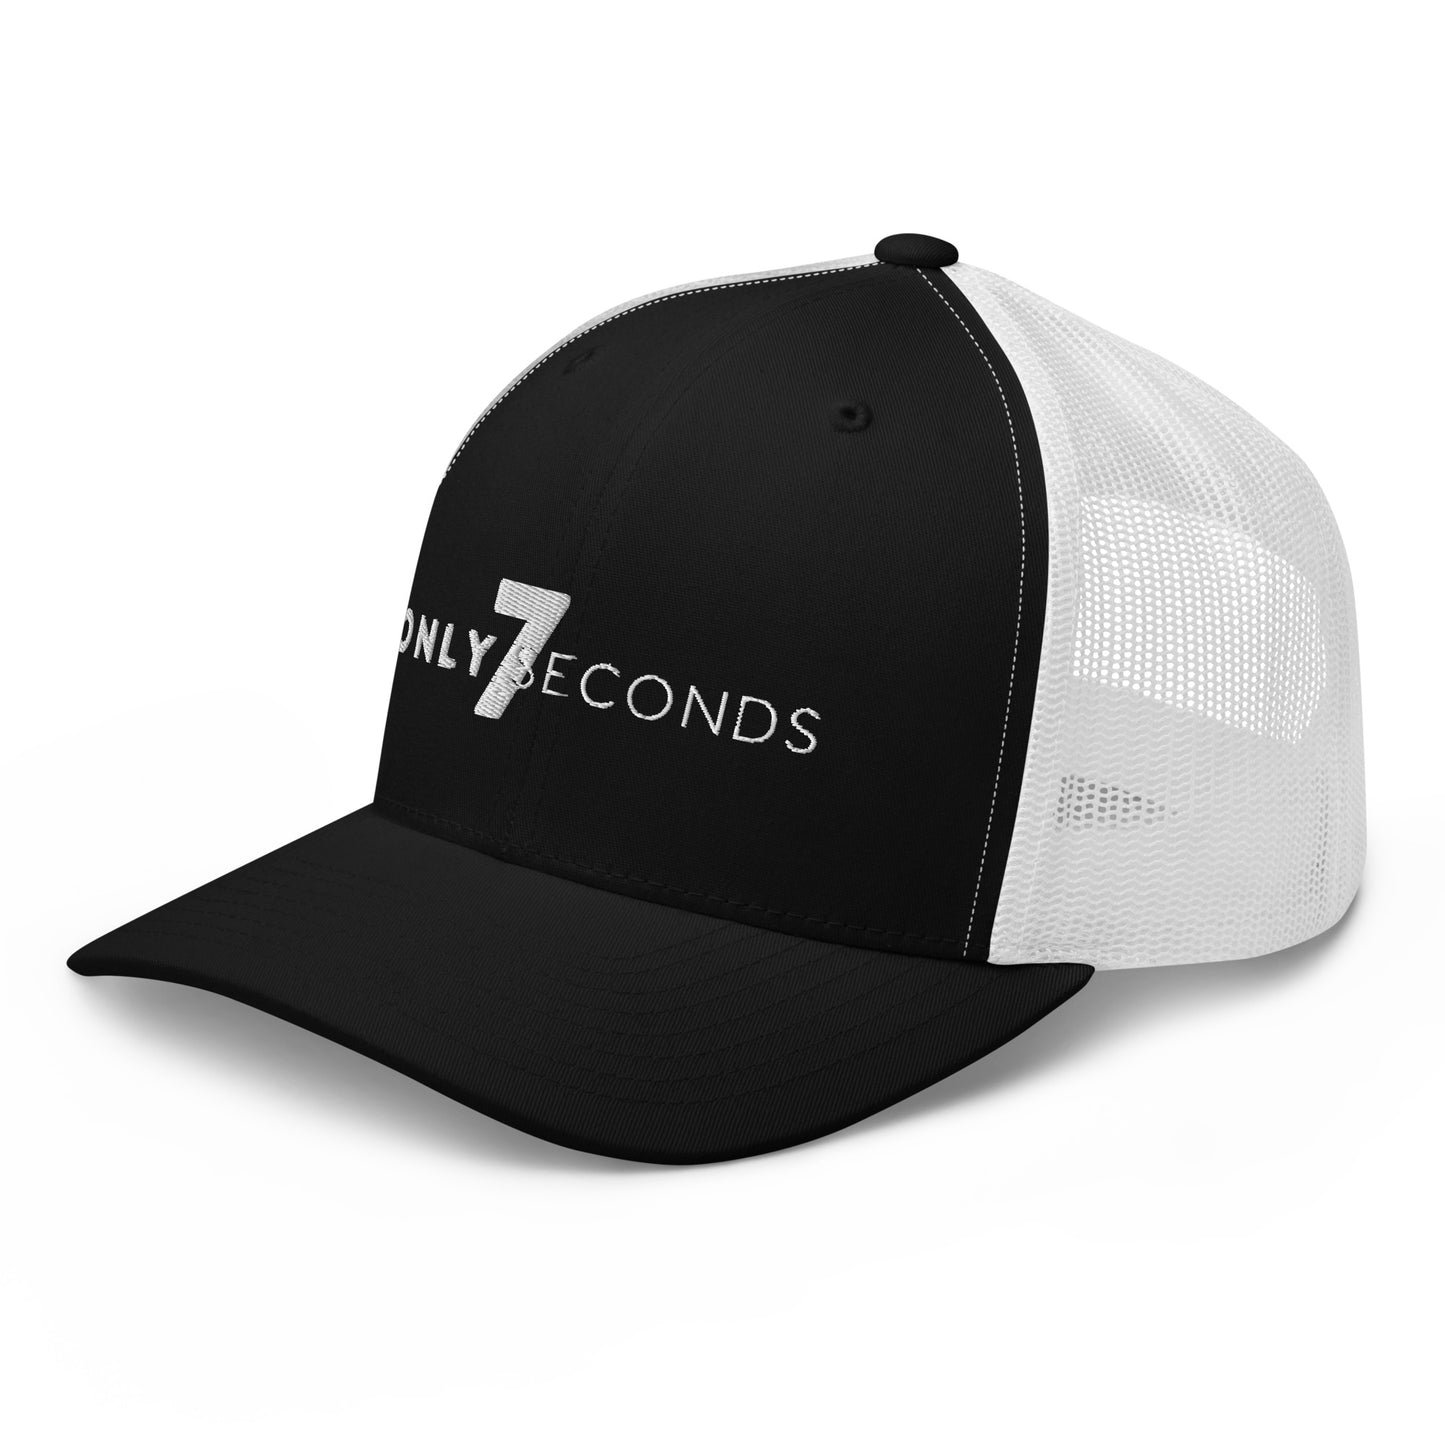 Only7Seconds Trucker Hat - Only7Seconds Shop